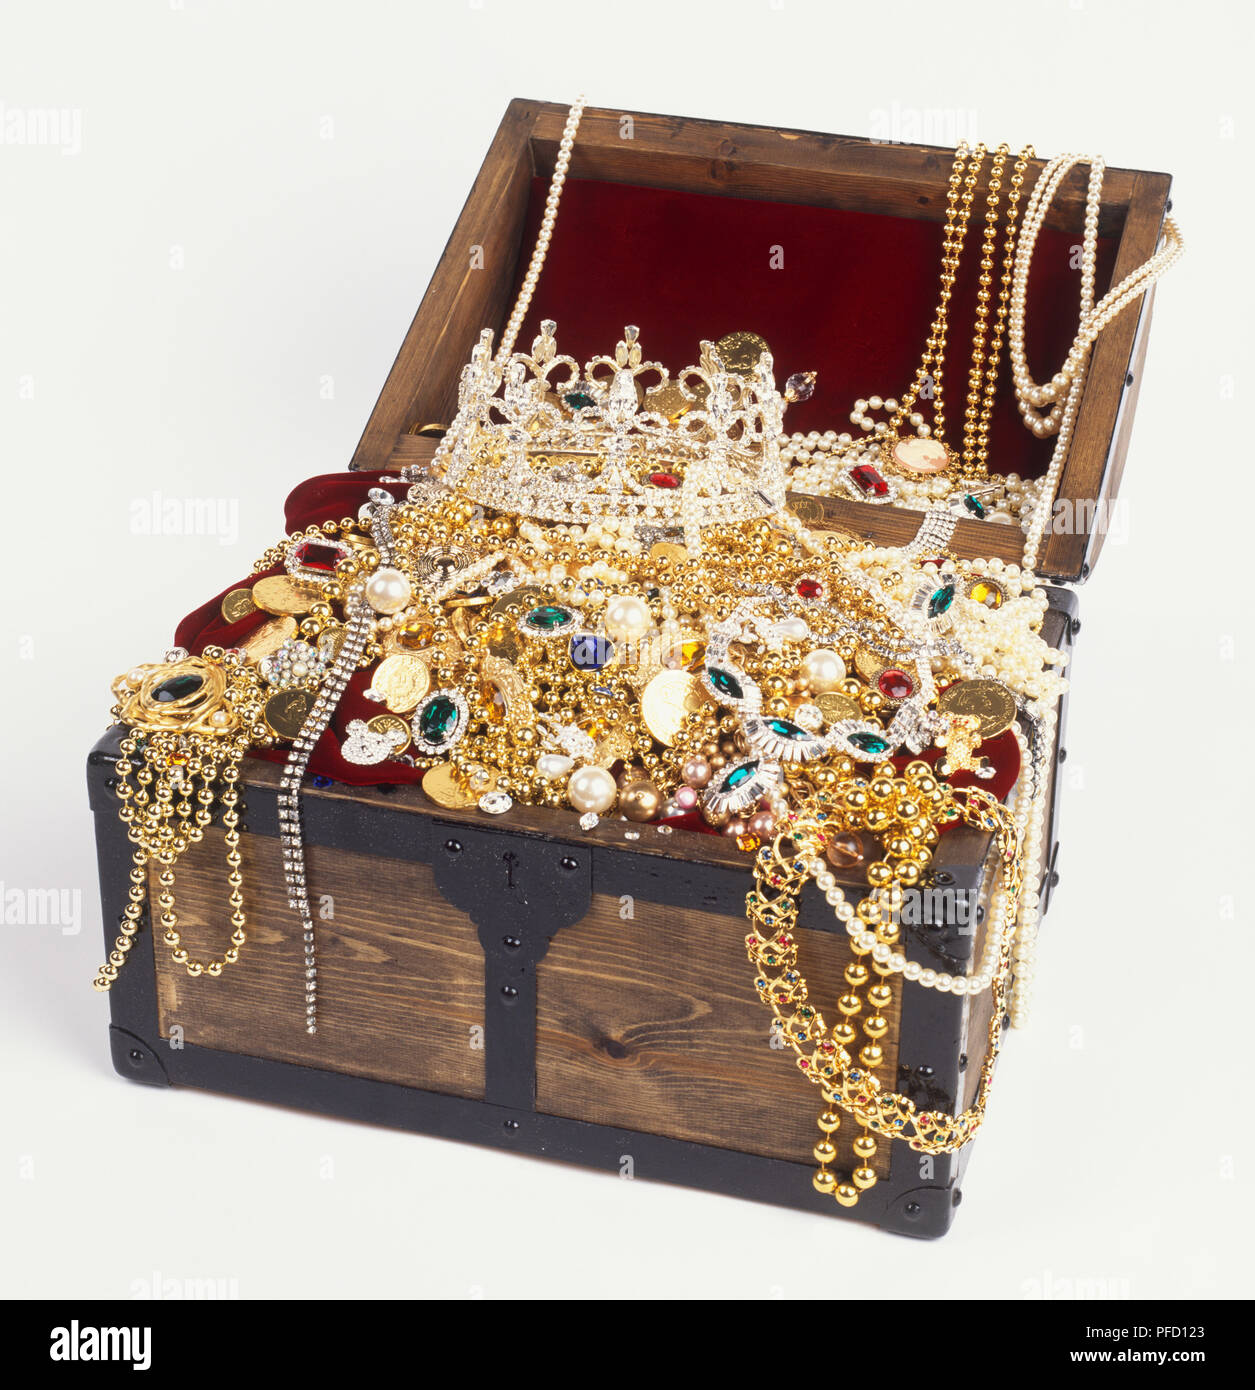 Open treasure chest overflowing with jewellery, elevated view Stock Photo